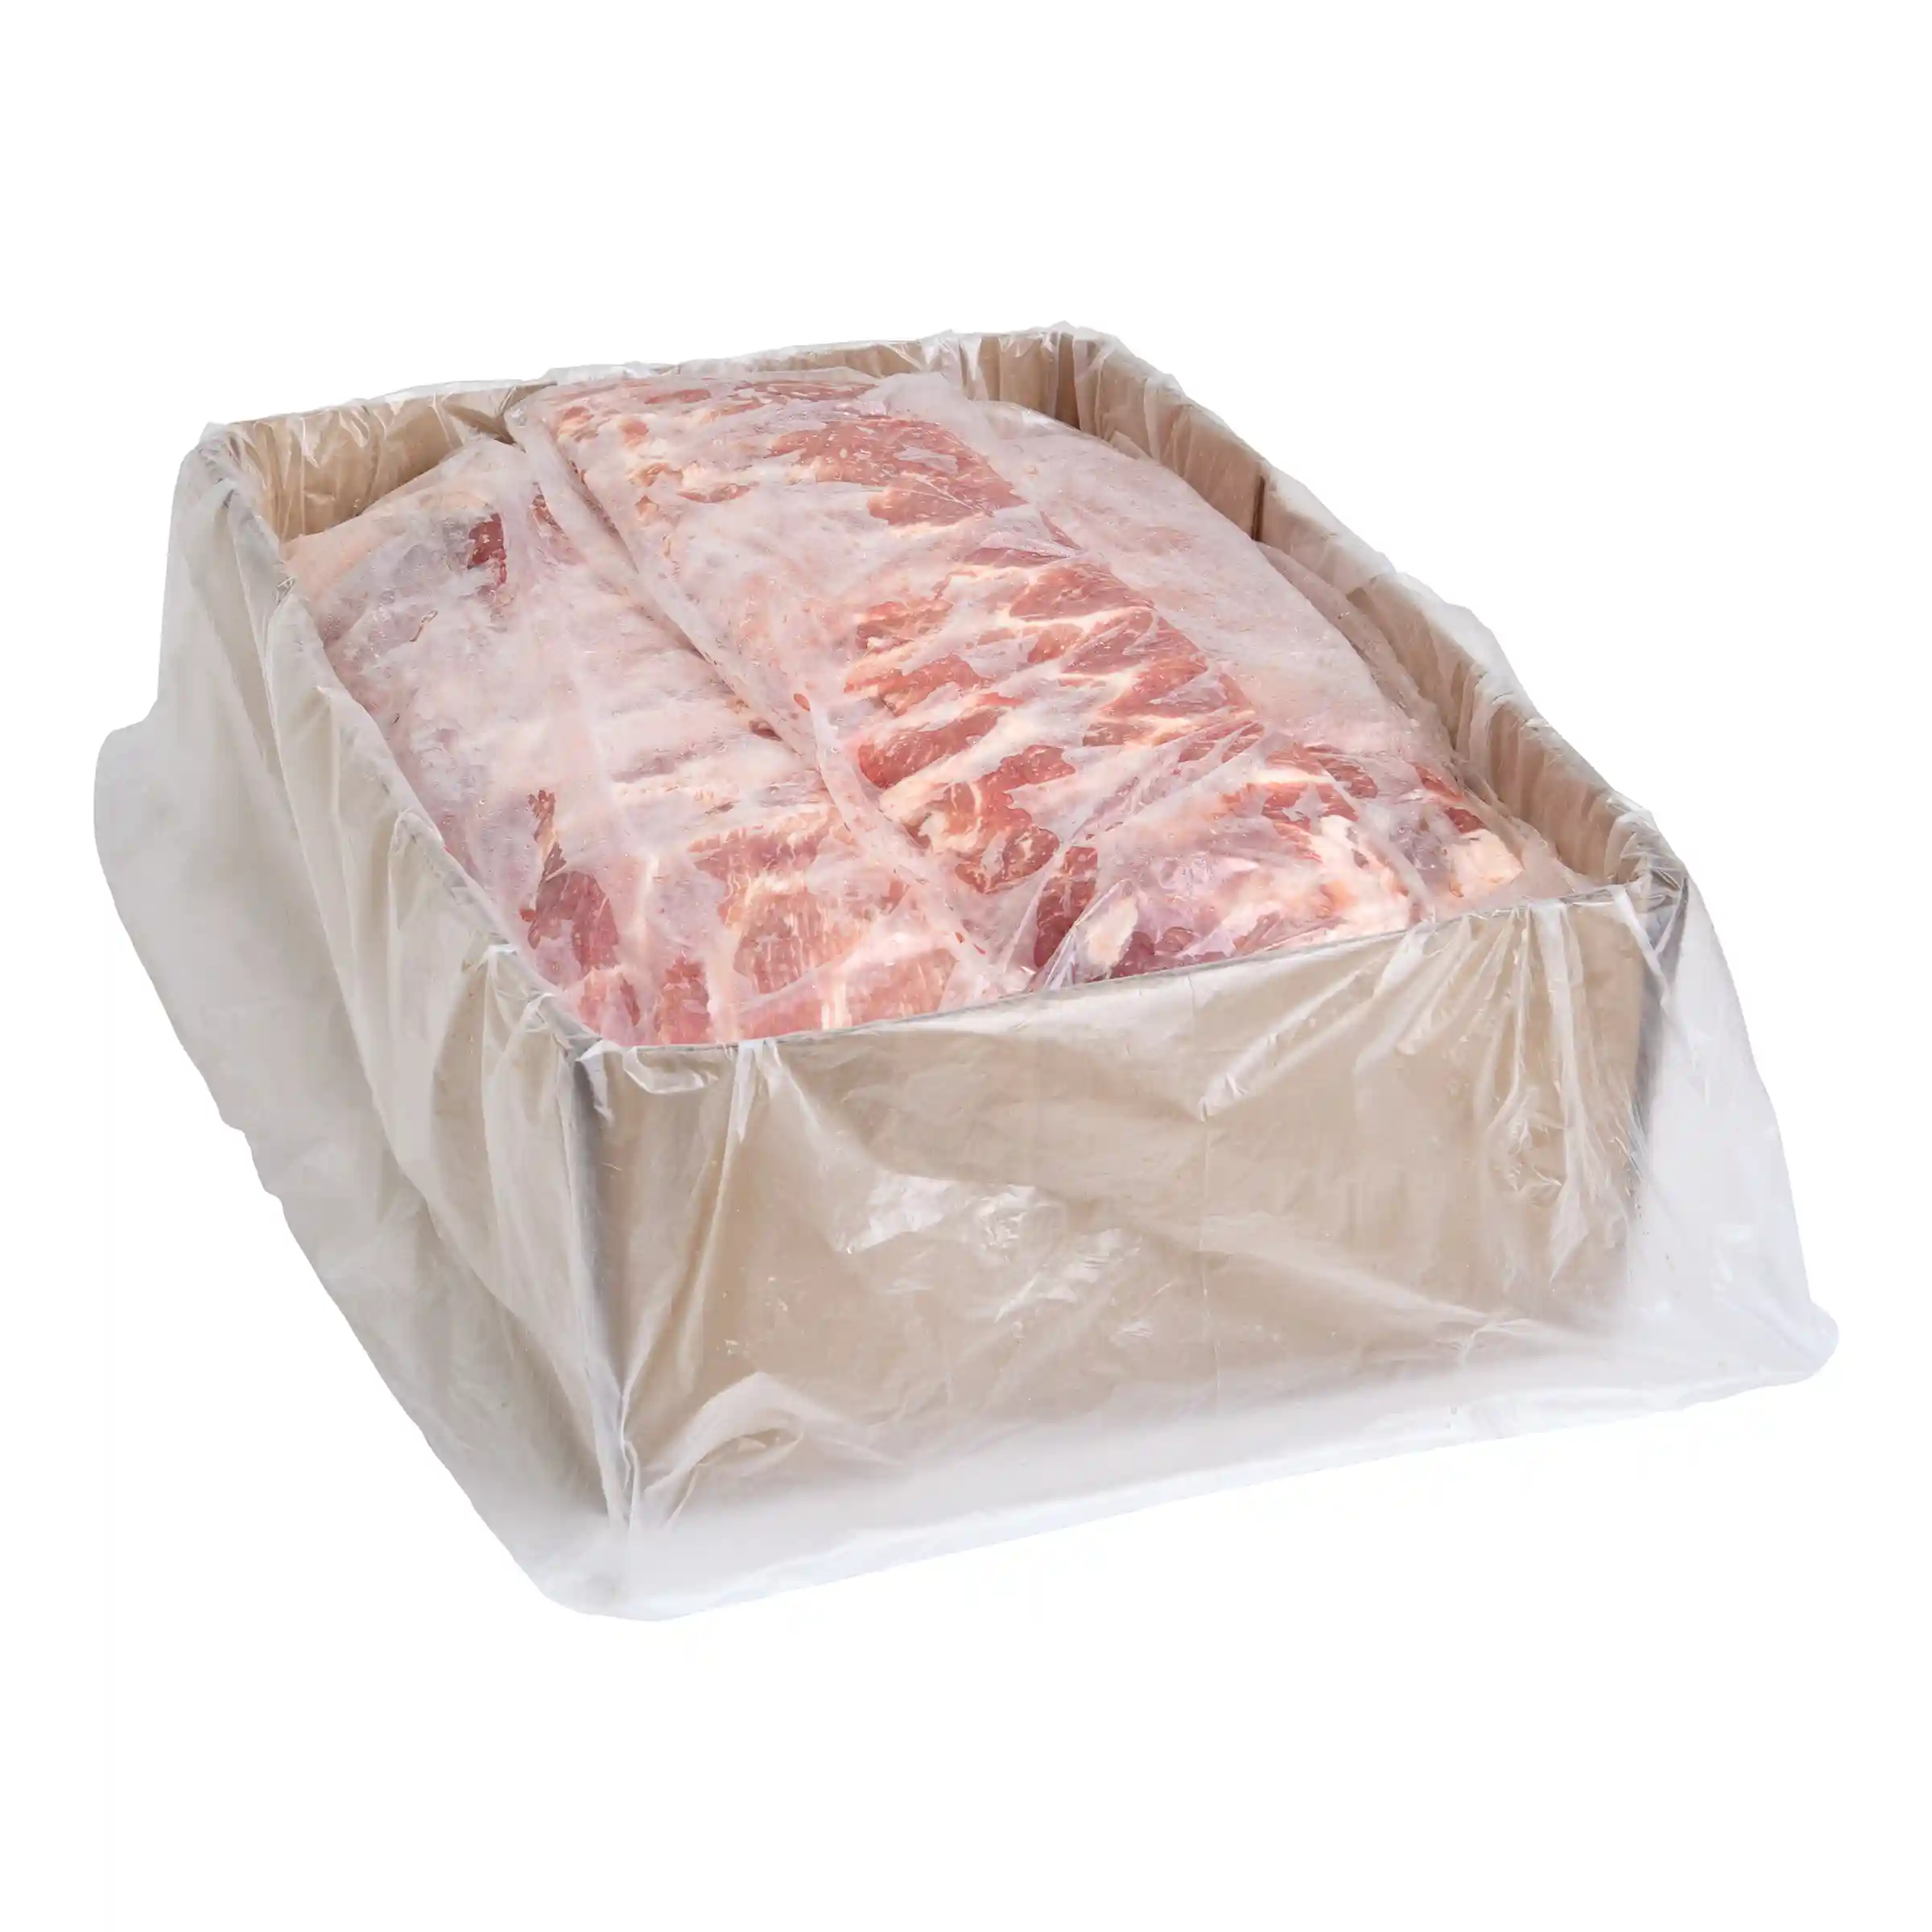 ibp Trusted Excellence® Brand St. Louis Style Ribs, 2.75 - 3.1 lbs_image_31